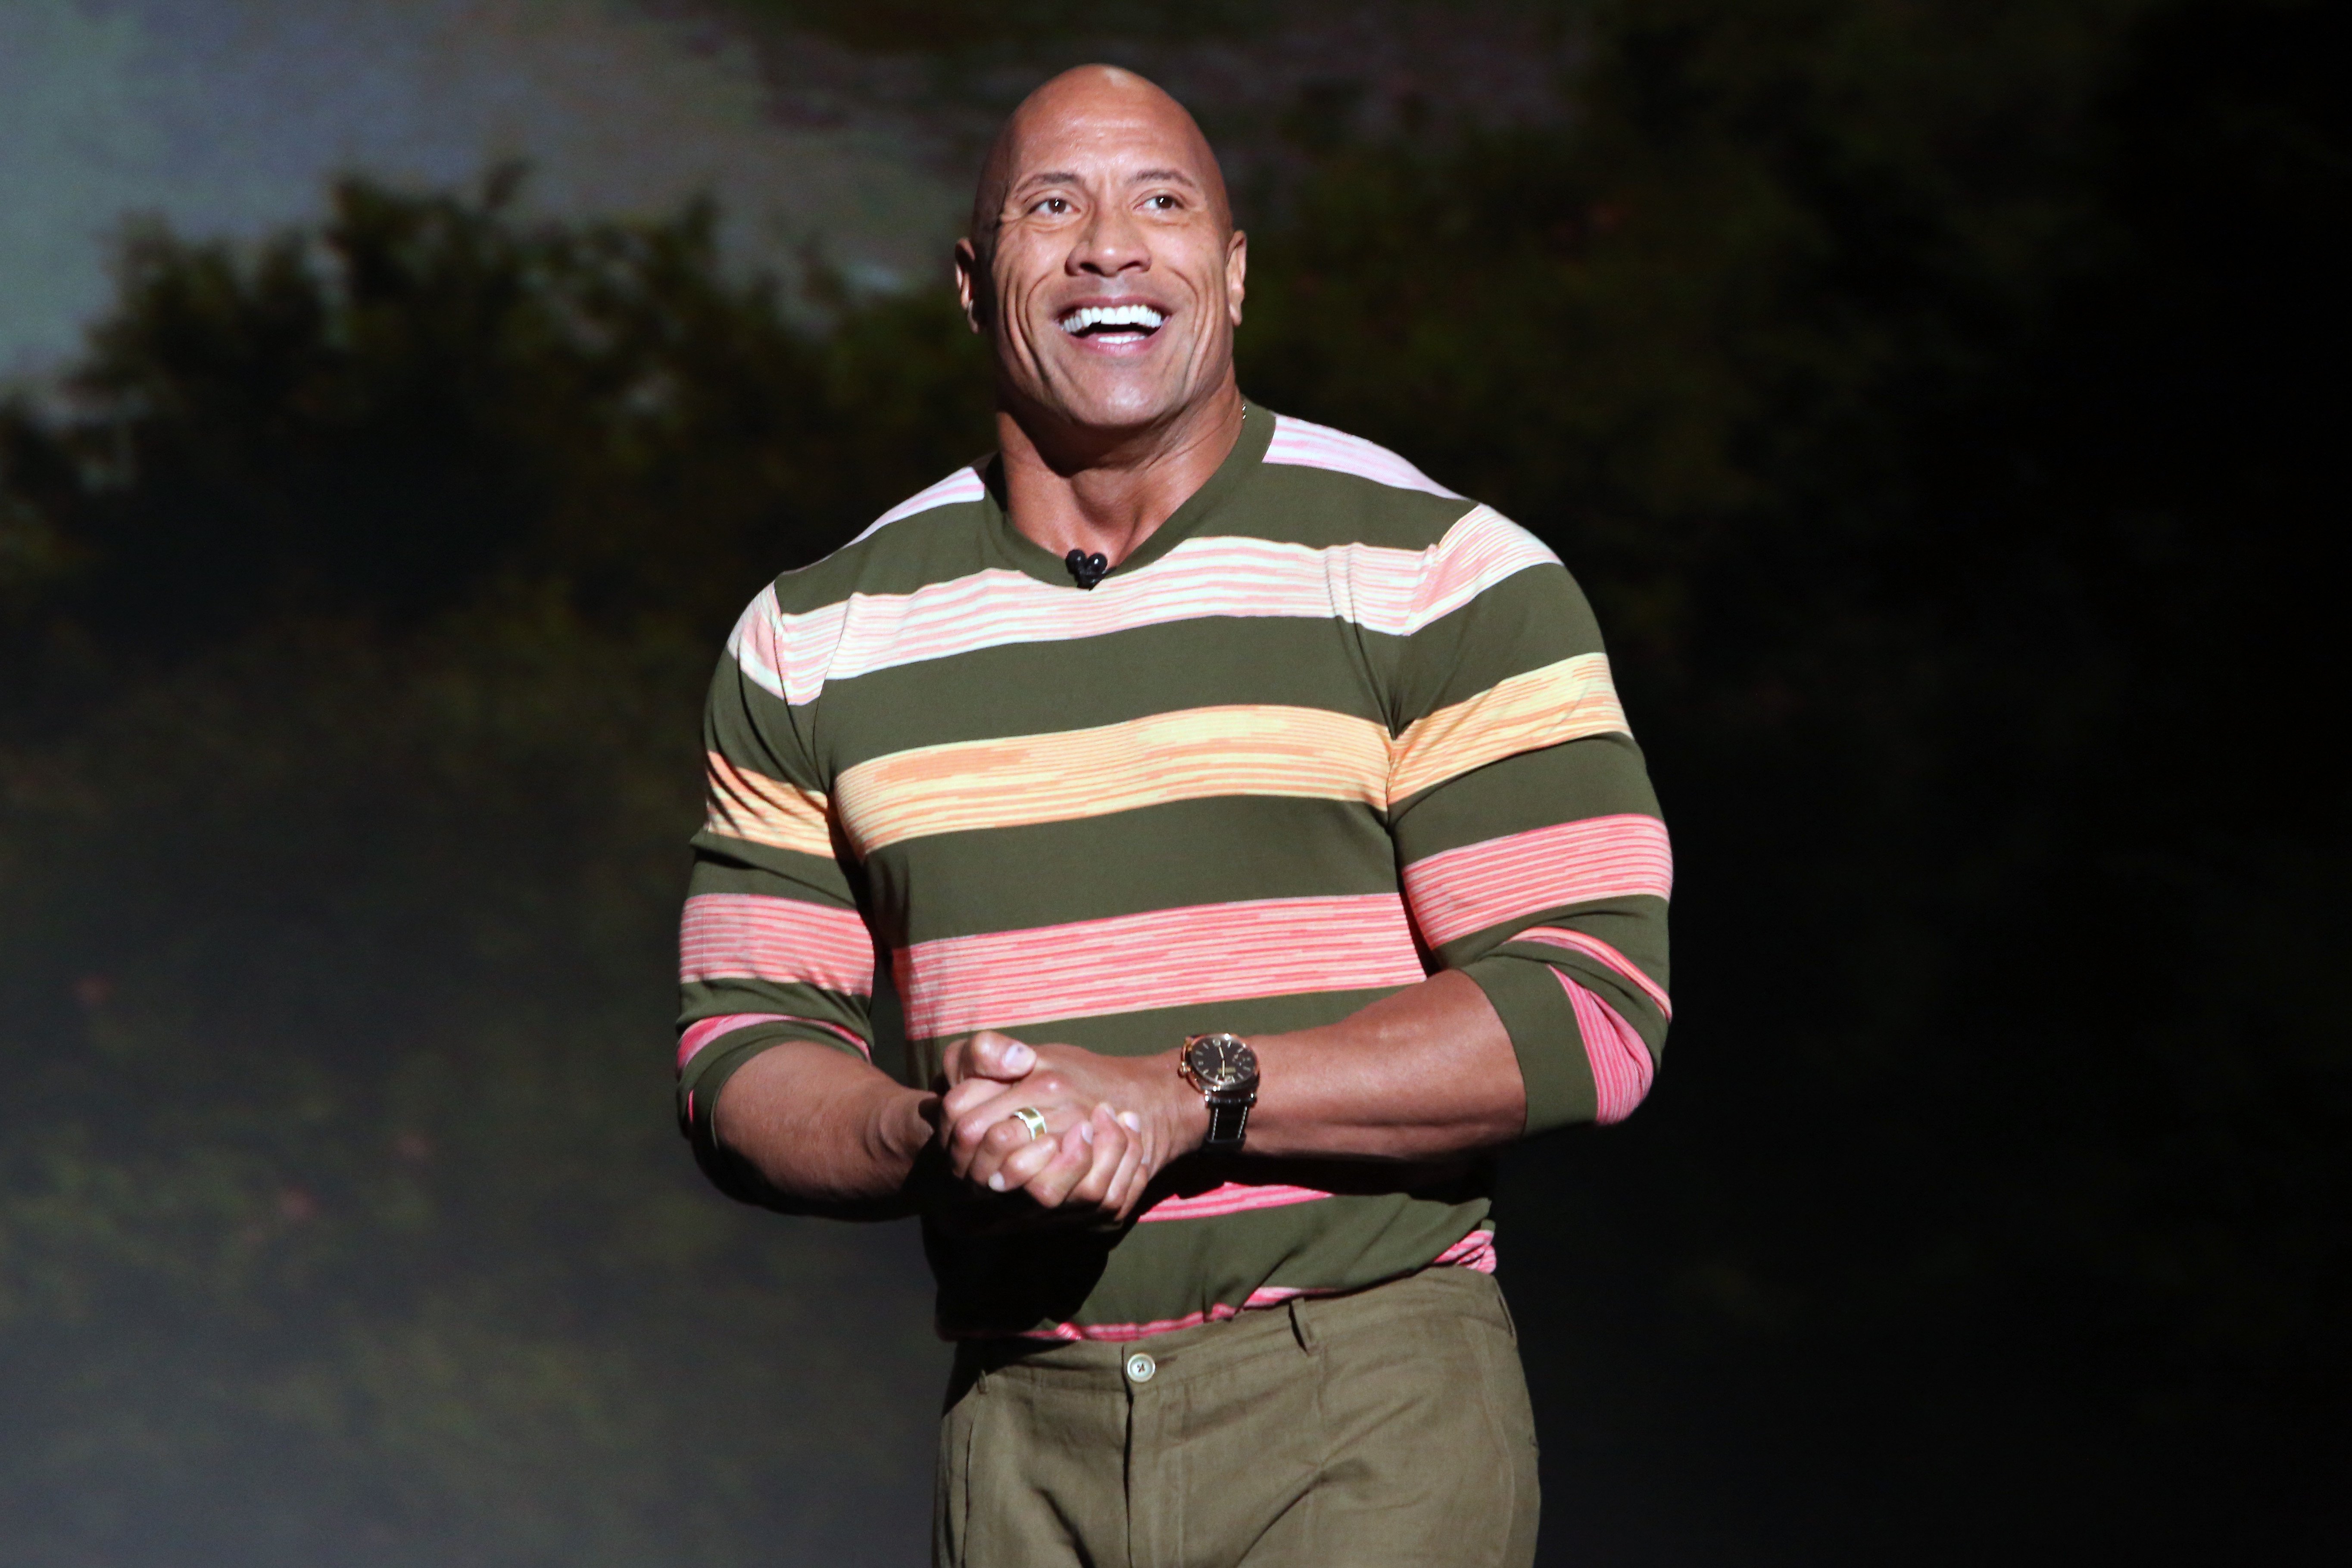 Dwayne Johnson at Disney's D23 EXPO in Anaheim, California | Photo: Getty Images